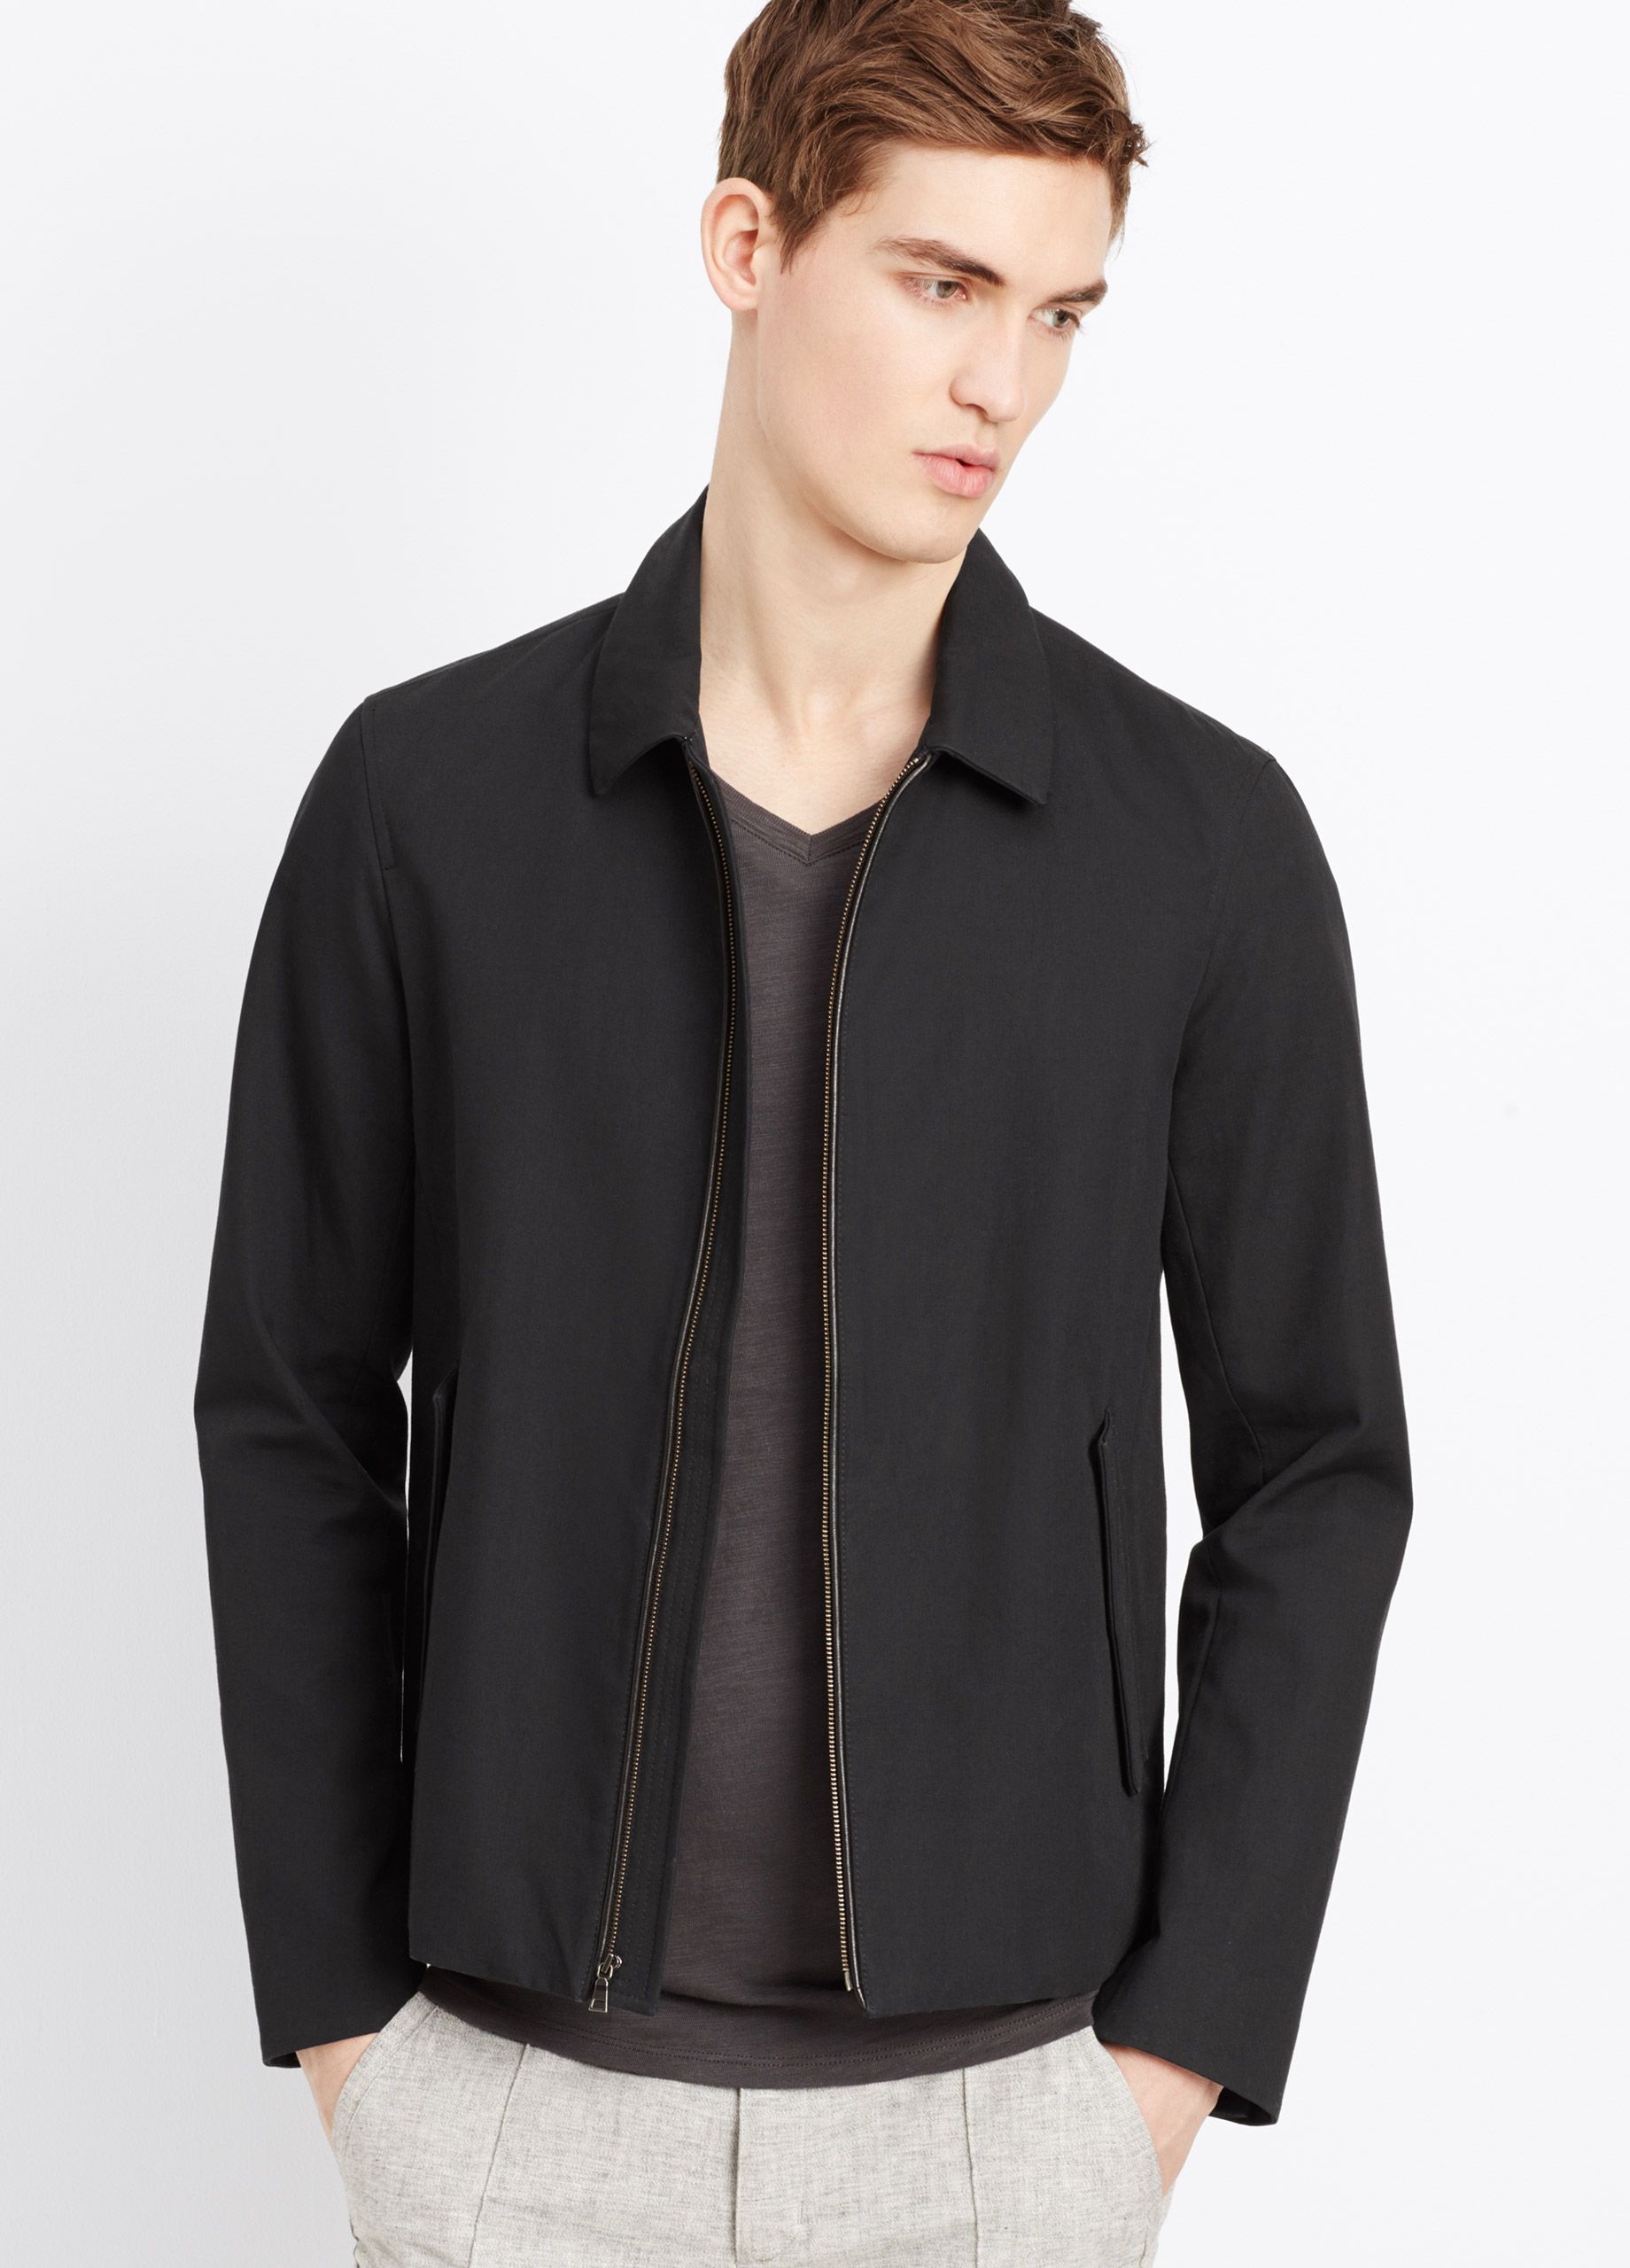 Lyst - Vince Bonded Cotton Jacket With Leather Detail in Black for Men